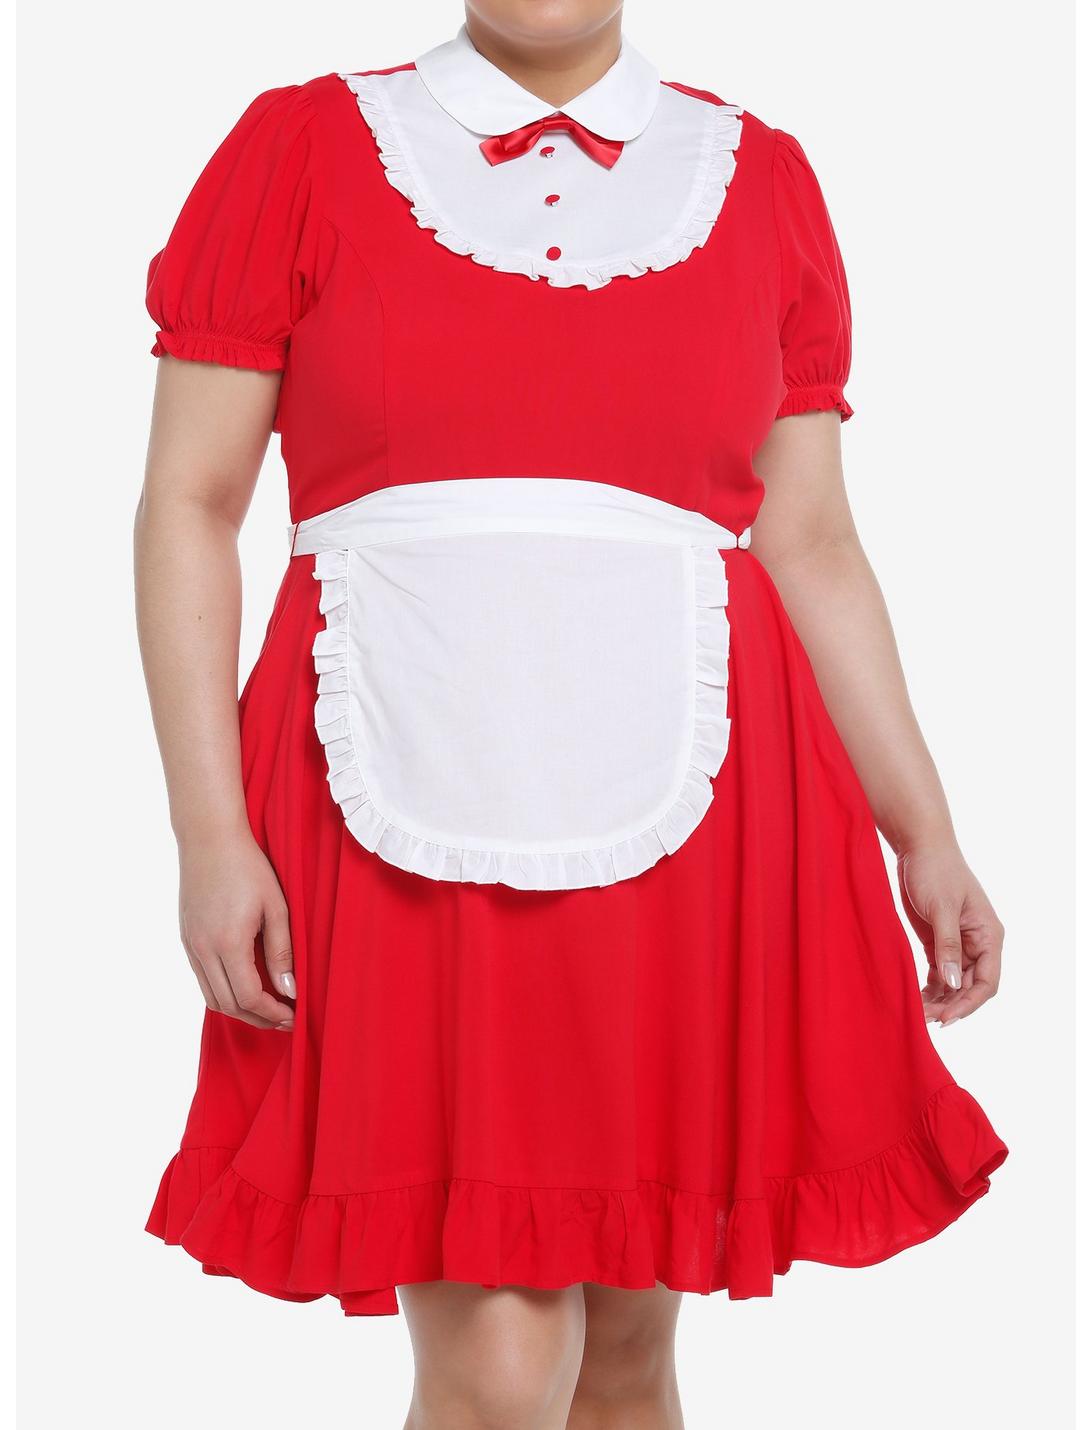 Sweet Society Red Apron Dress Plus Size, RED, hi-res